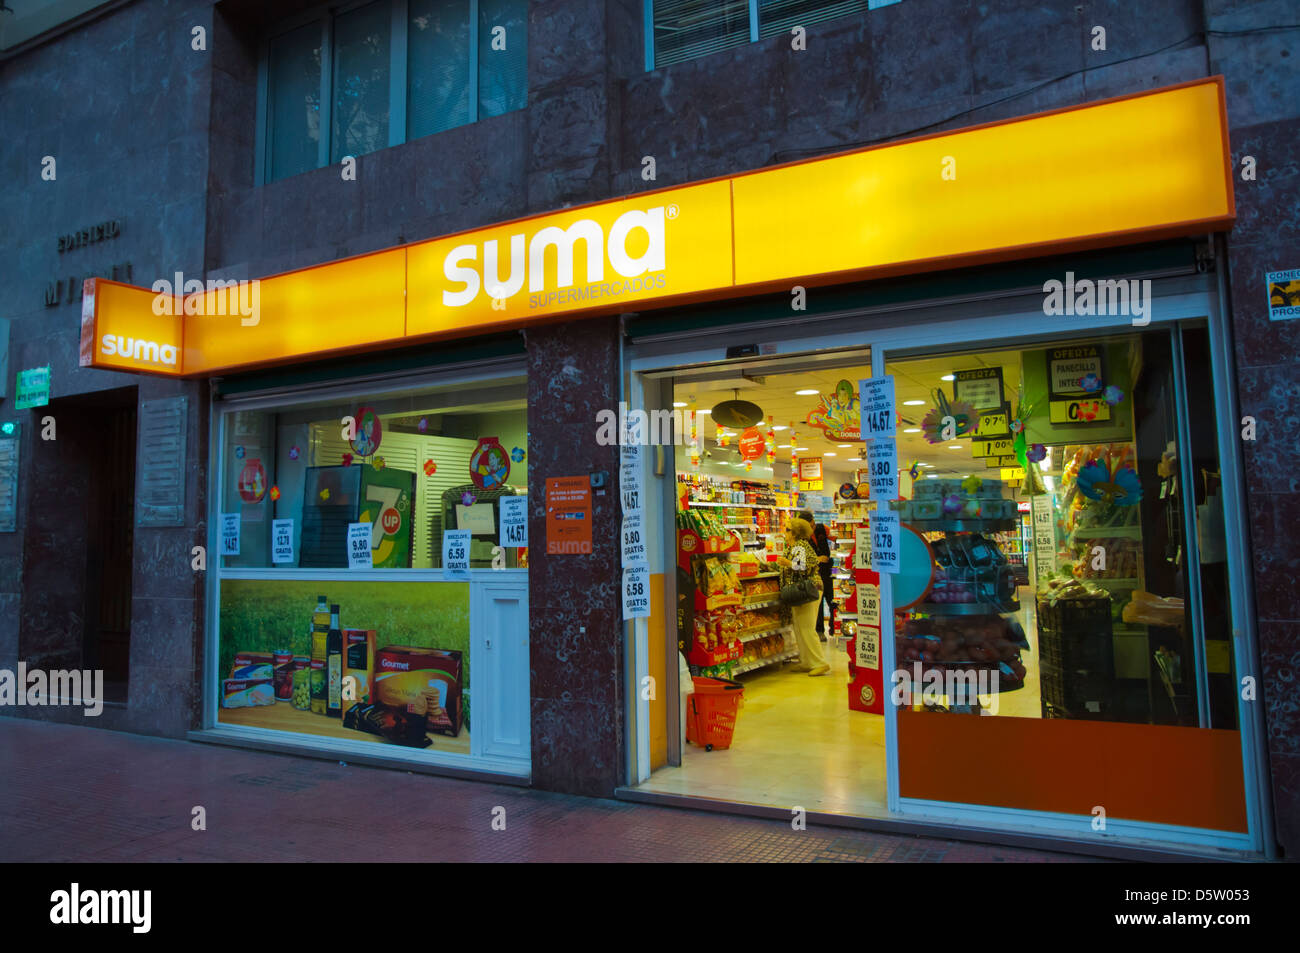 Shopping Spain Chain High Resolution Stock Photography and Images - Alamy